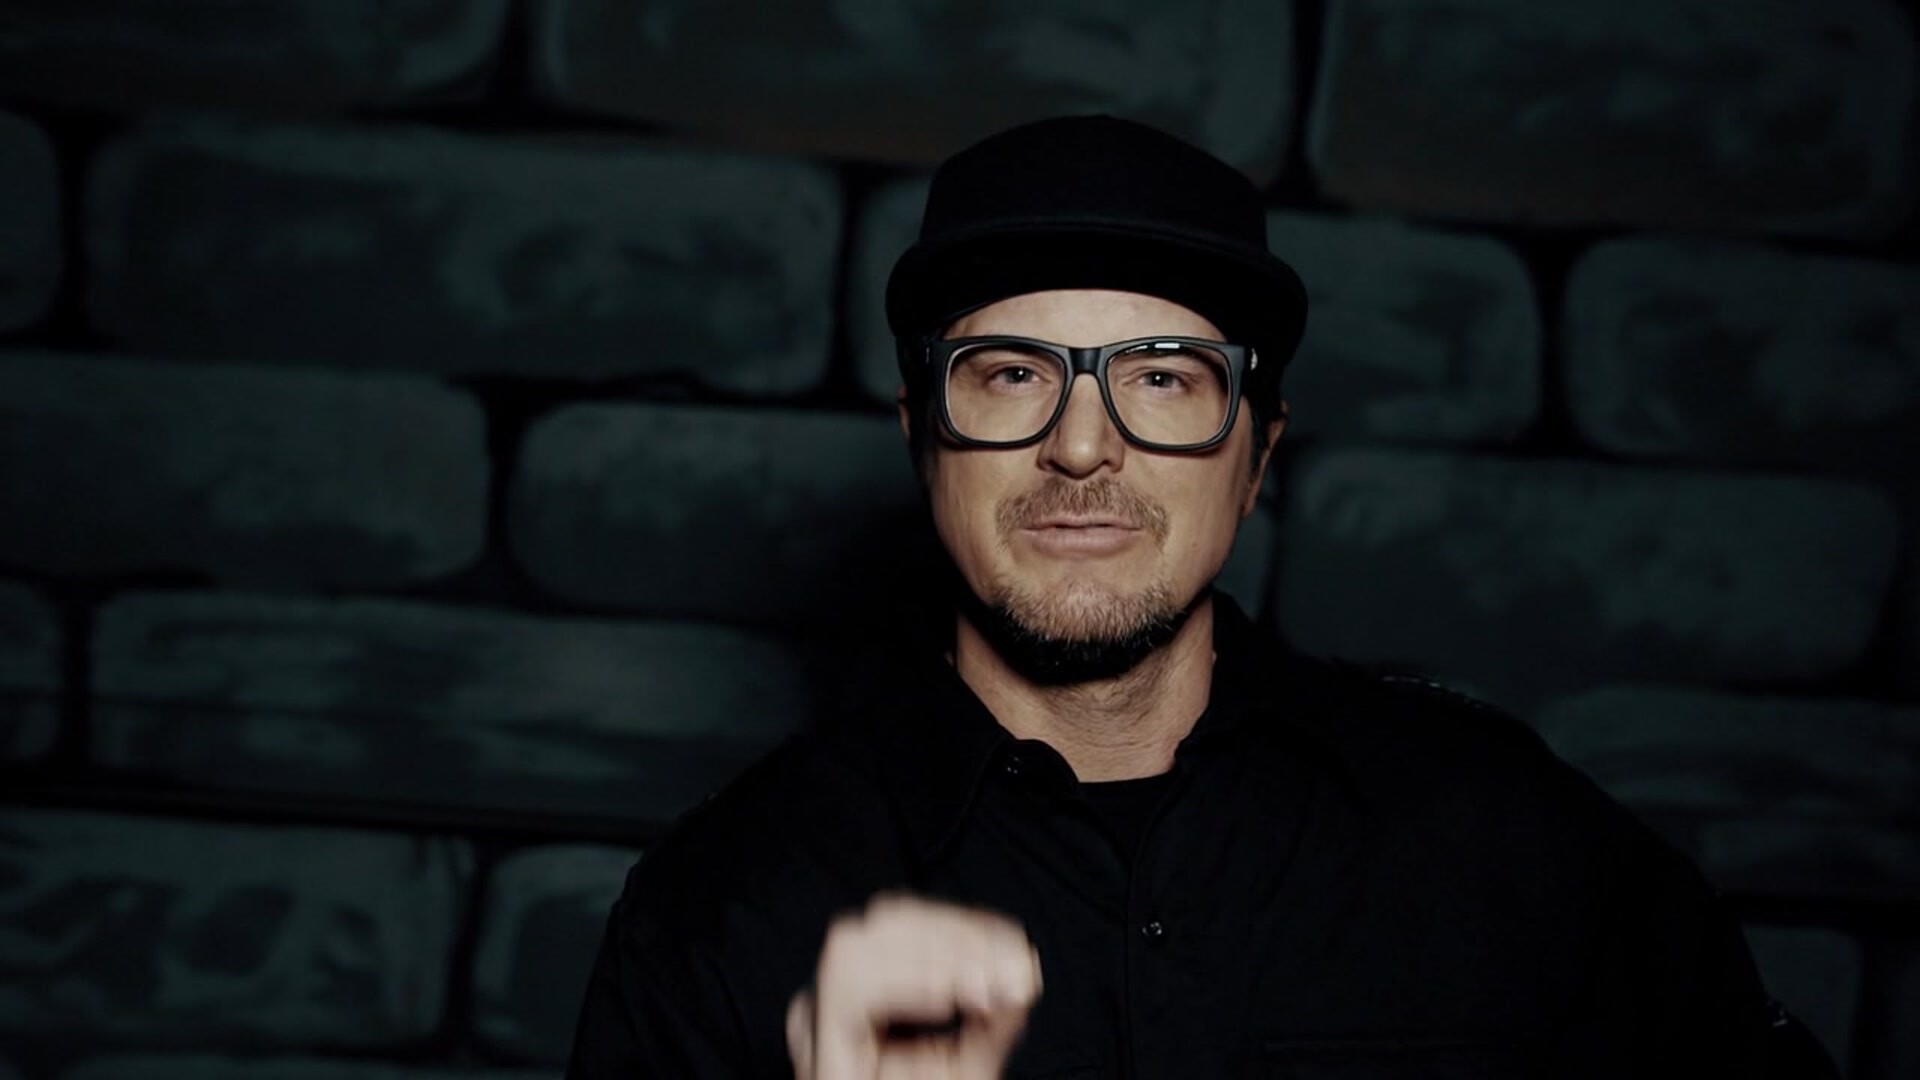 Ghost Adventures (TV Series): Zachary Bagans, An American paranormal investigator from Washington, Show runner. 1920x1080 Full HD Wallpaper.